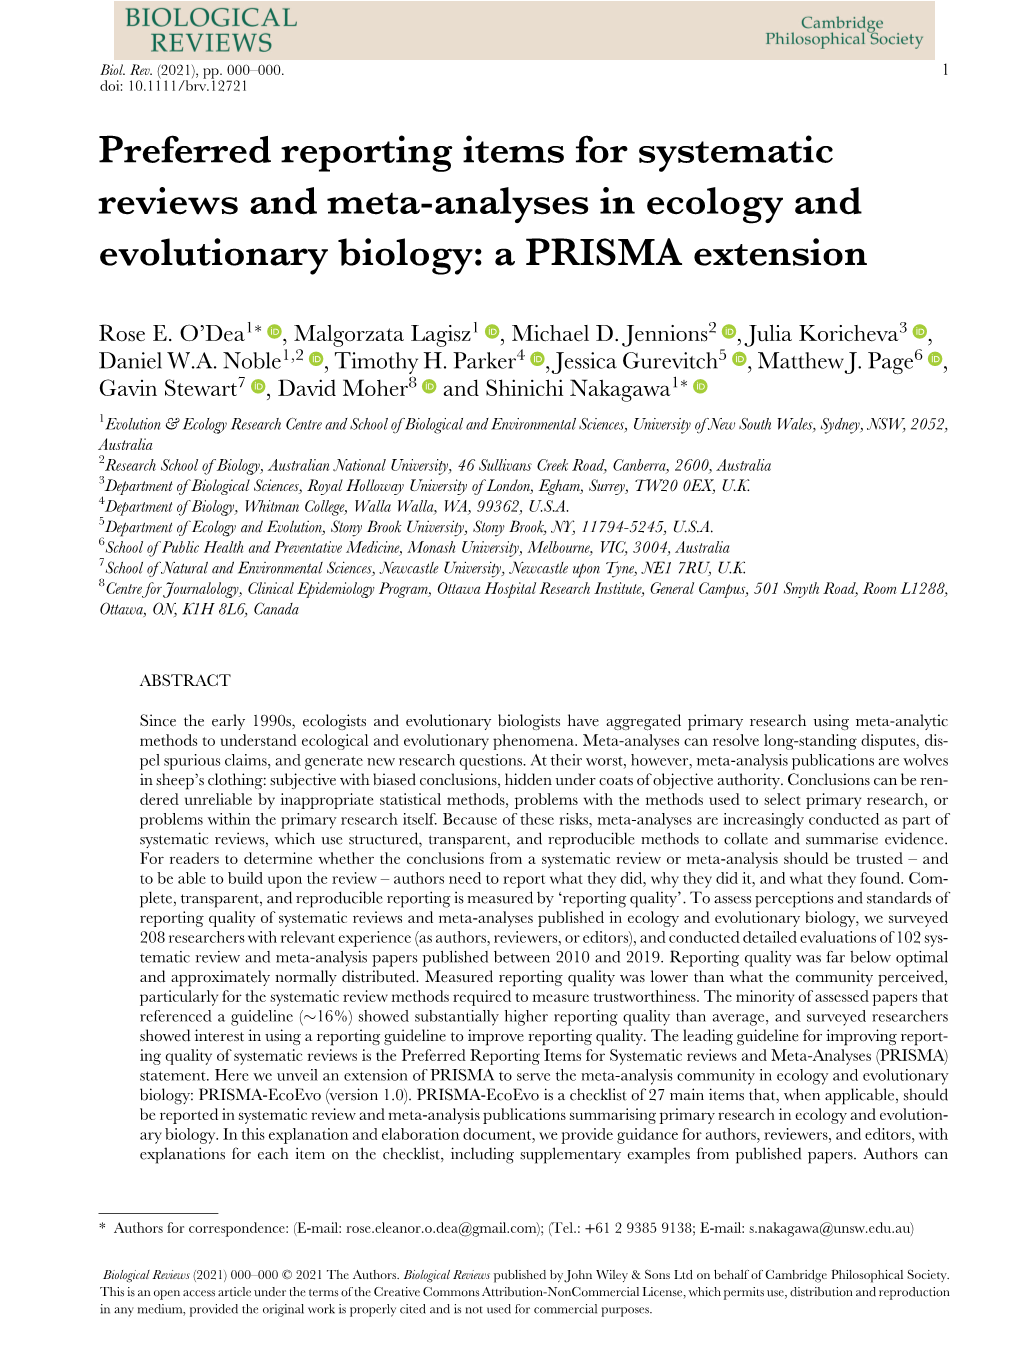 Preferred Reporting Items for Systematic Reviews and Meta-Analyses in Ecology and Evolutionary Biology: a PRISMA Extension